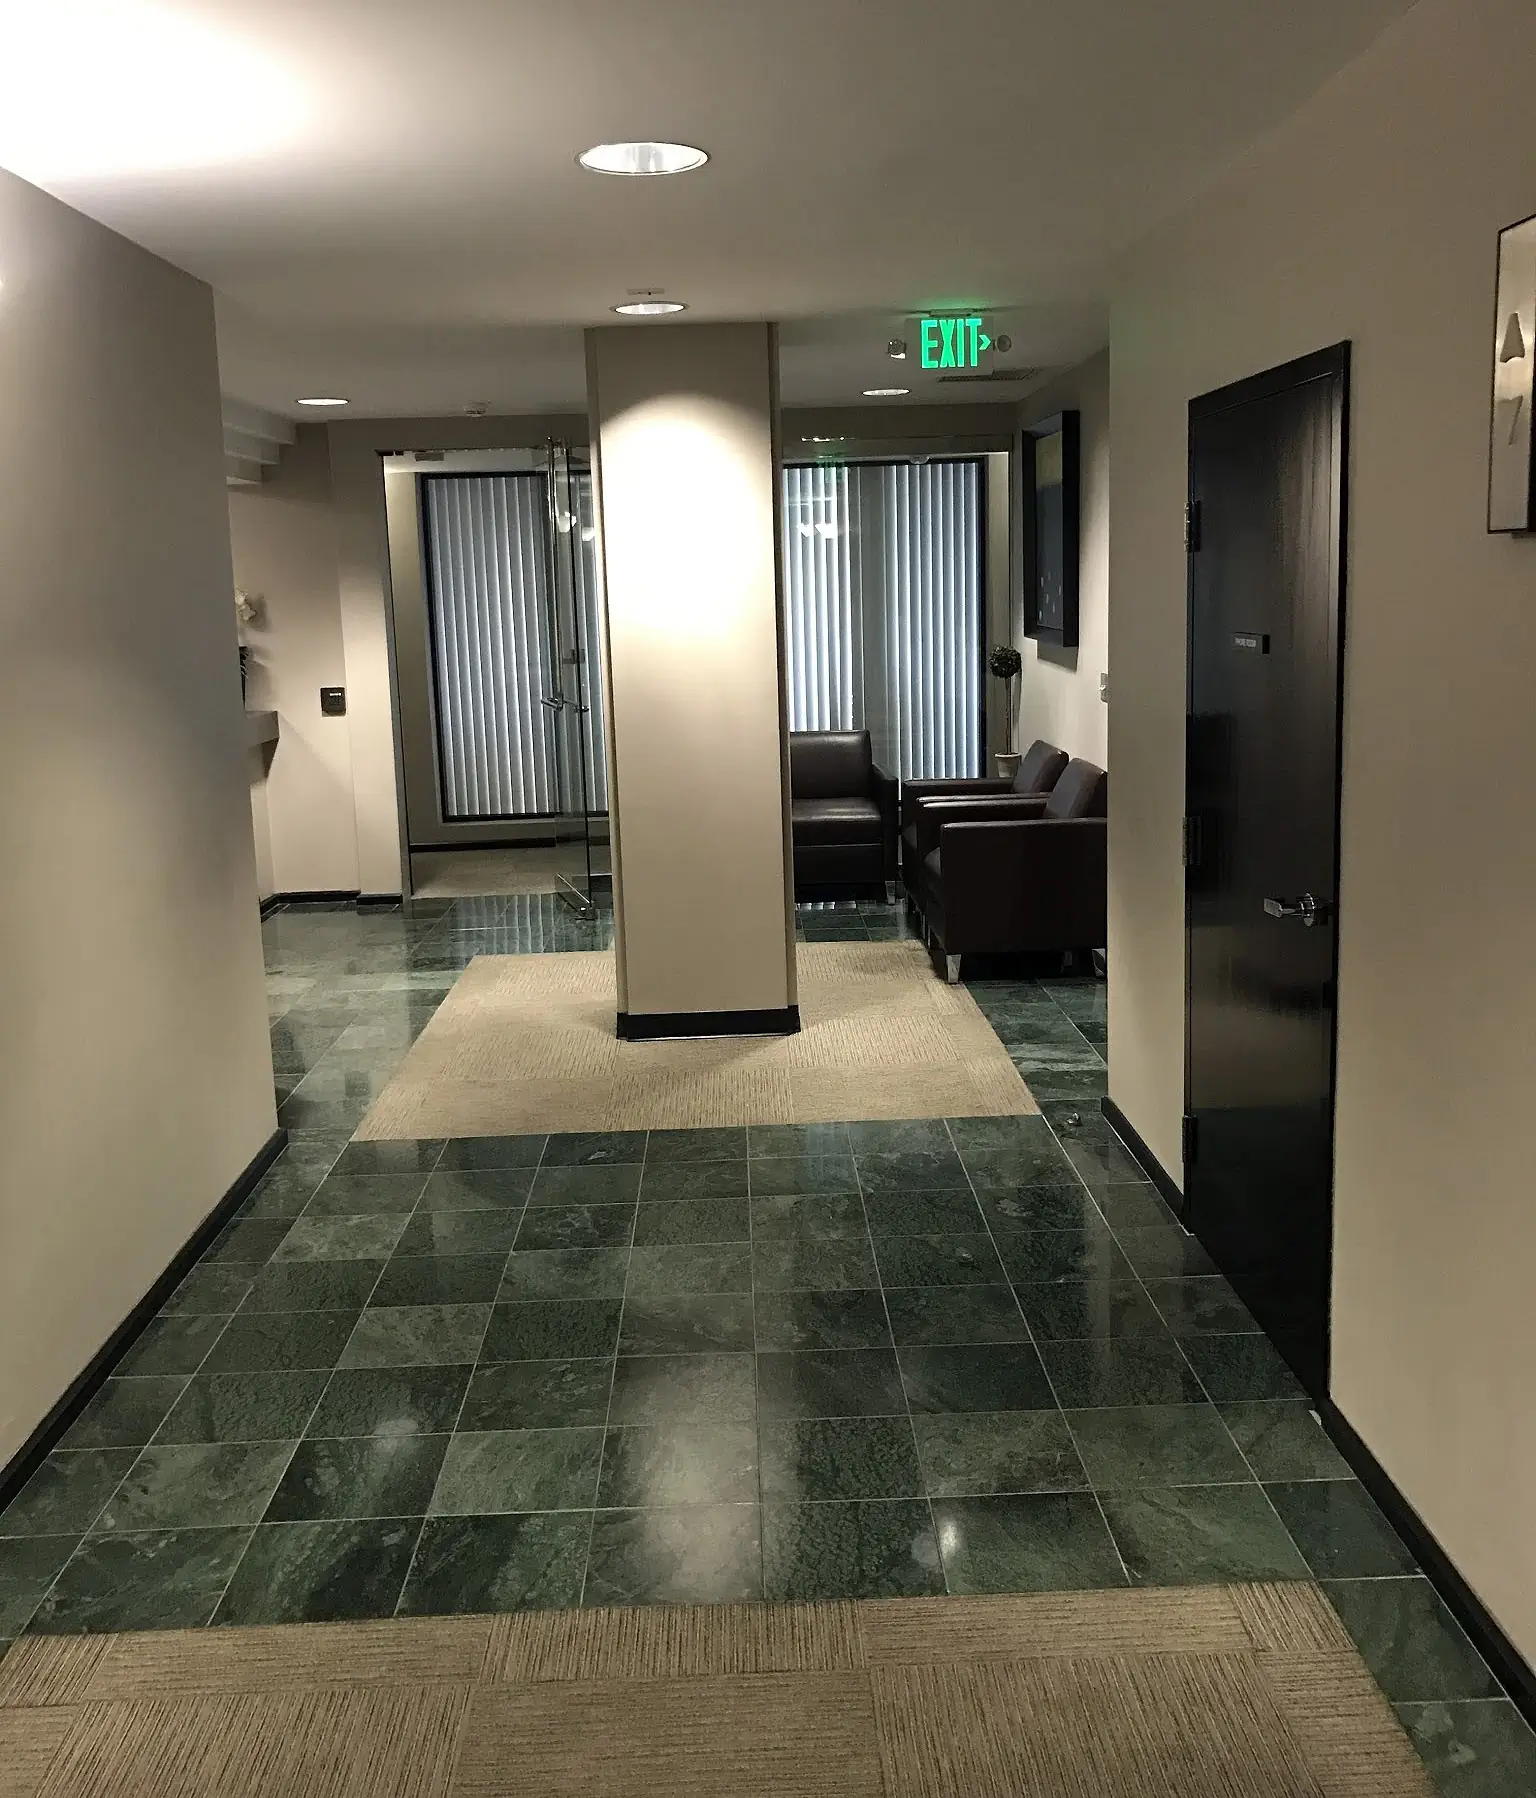 Employment Lawyers Group, Truxtun Towers Downtown Bakersfield